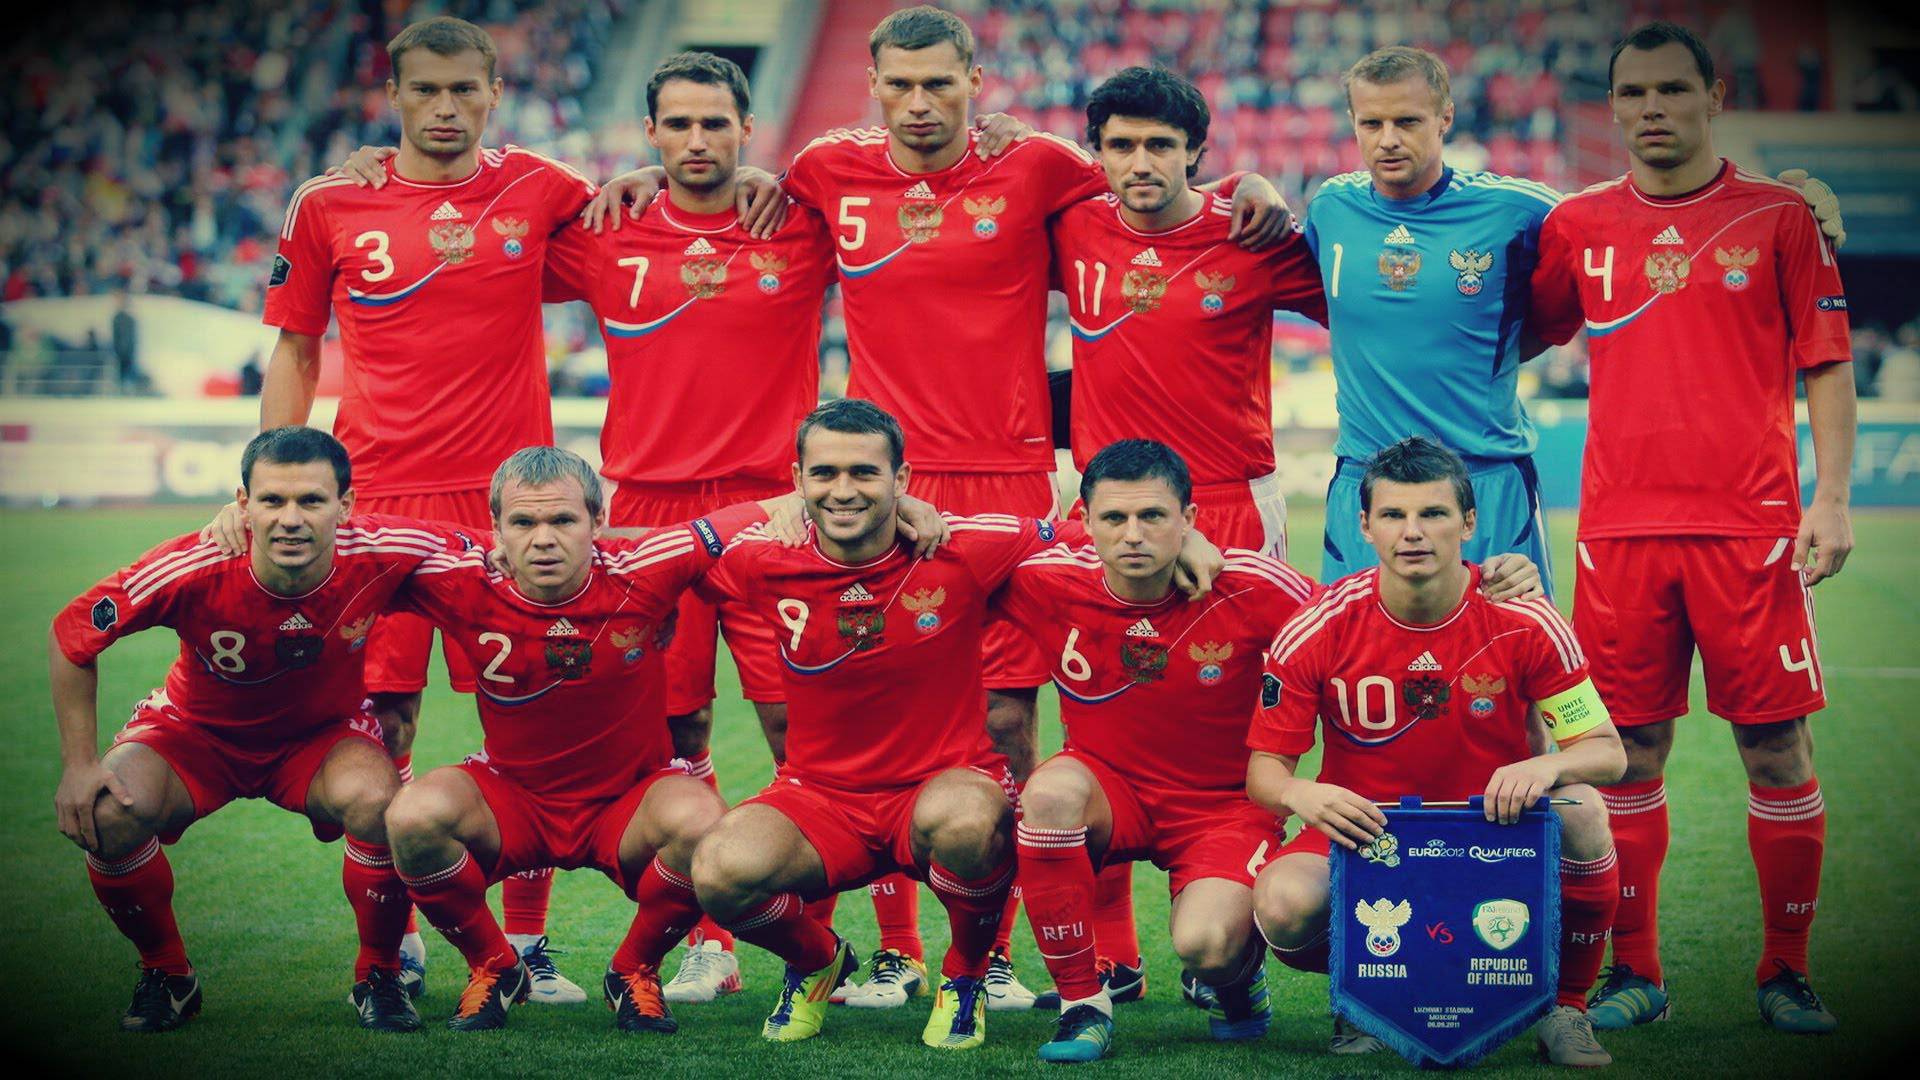 Russia National Football Team Wallpapers - Wallpaper Cave